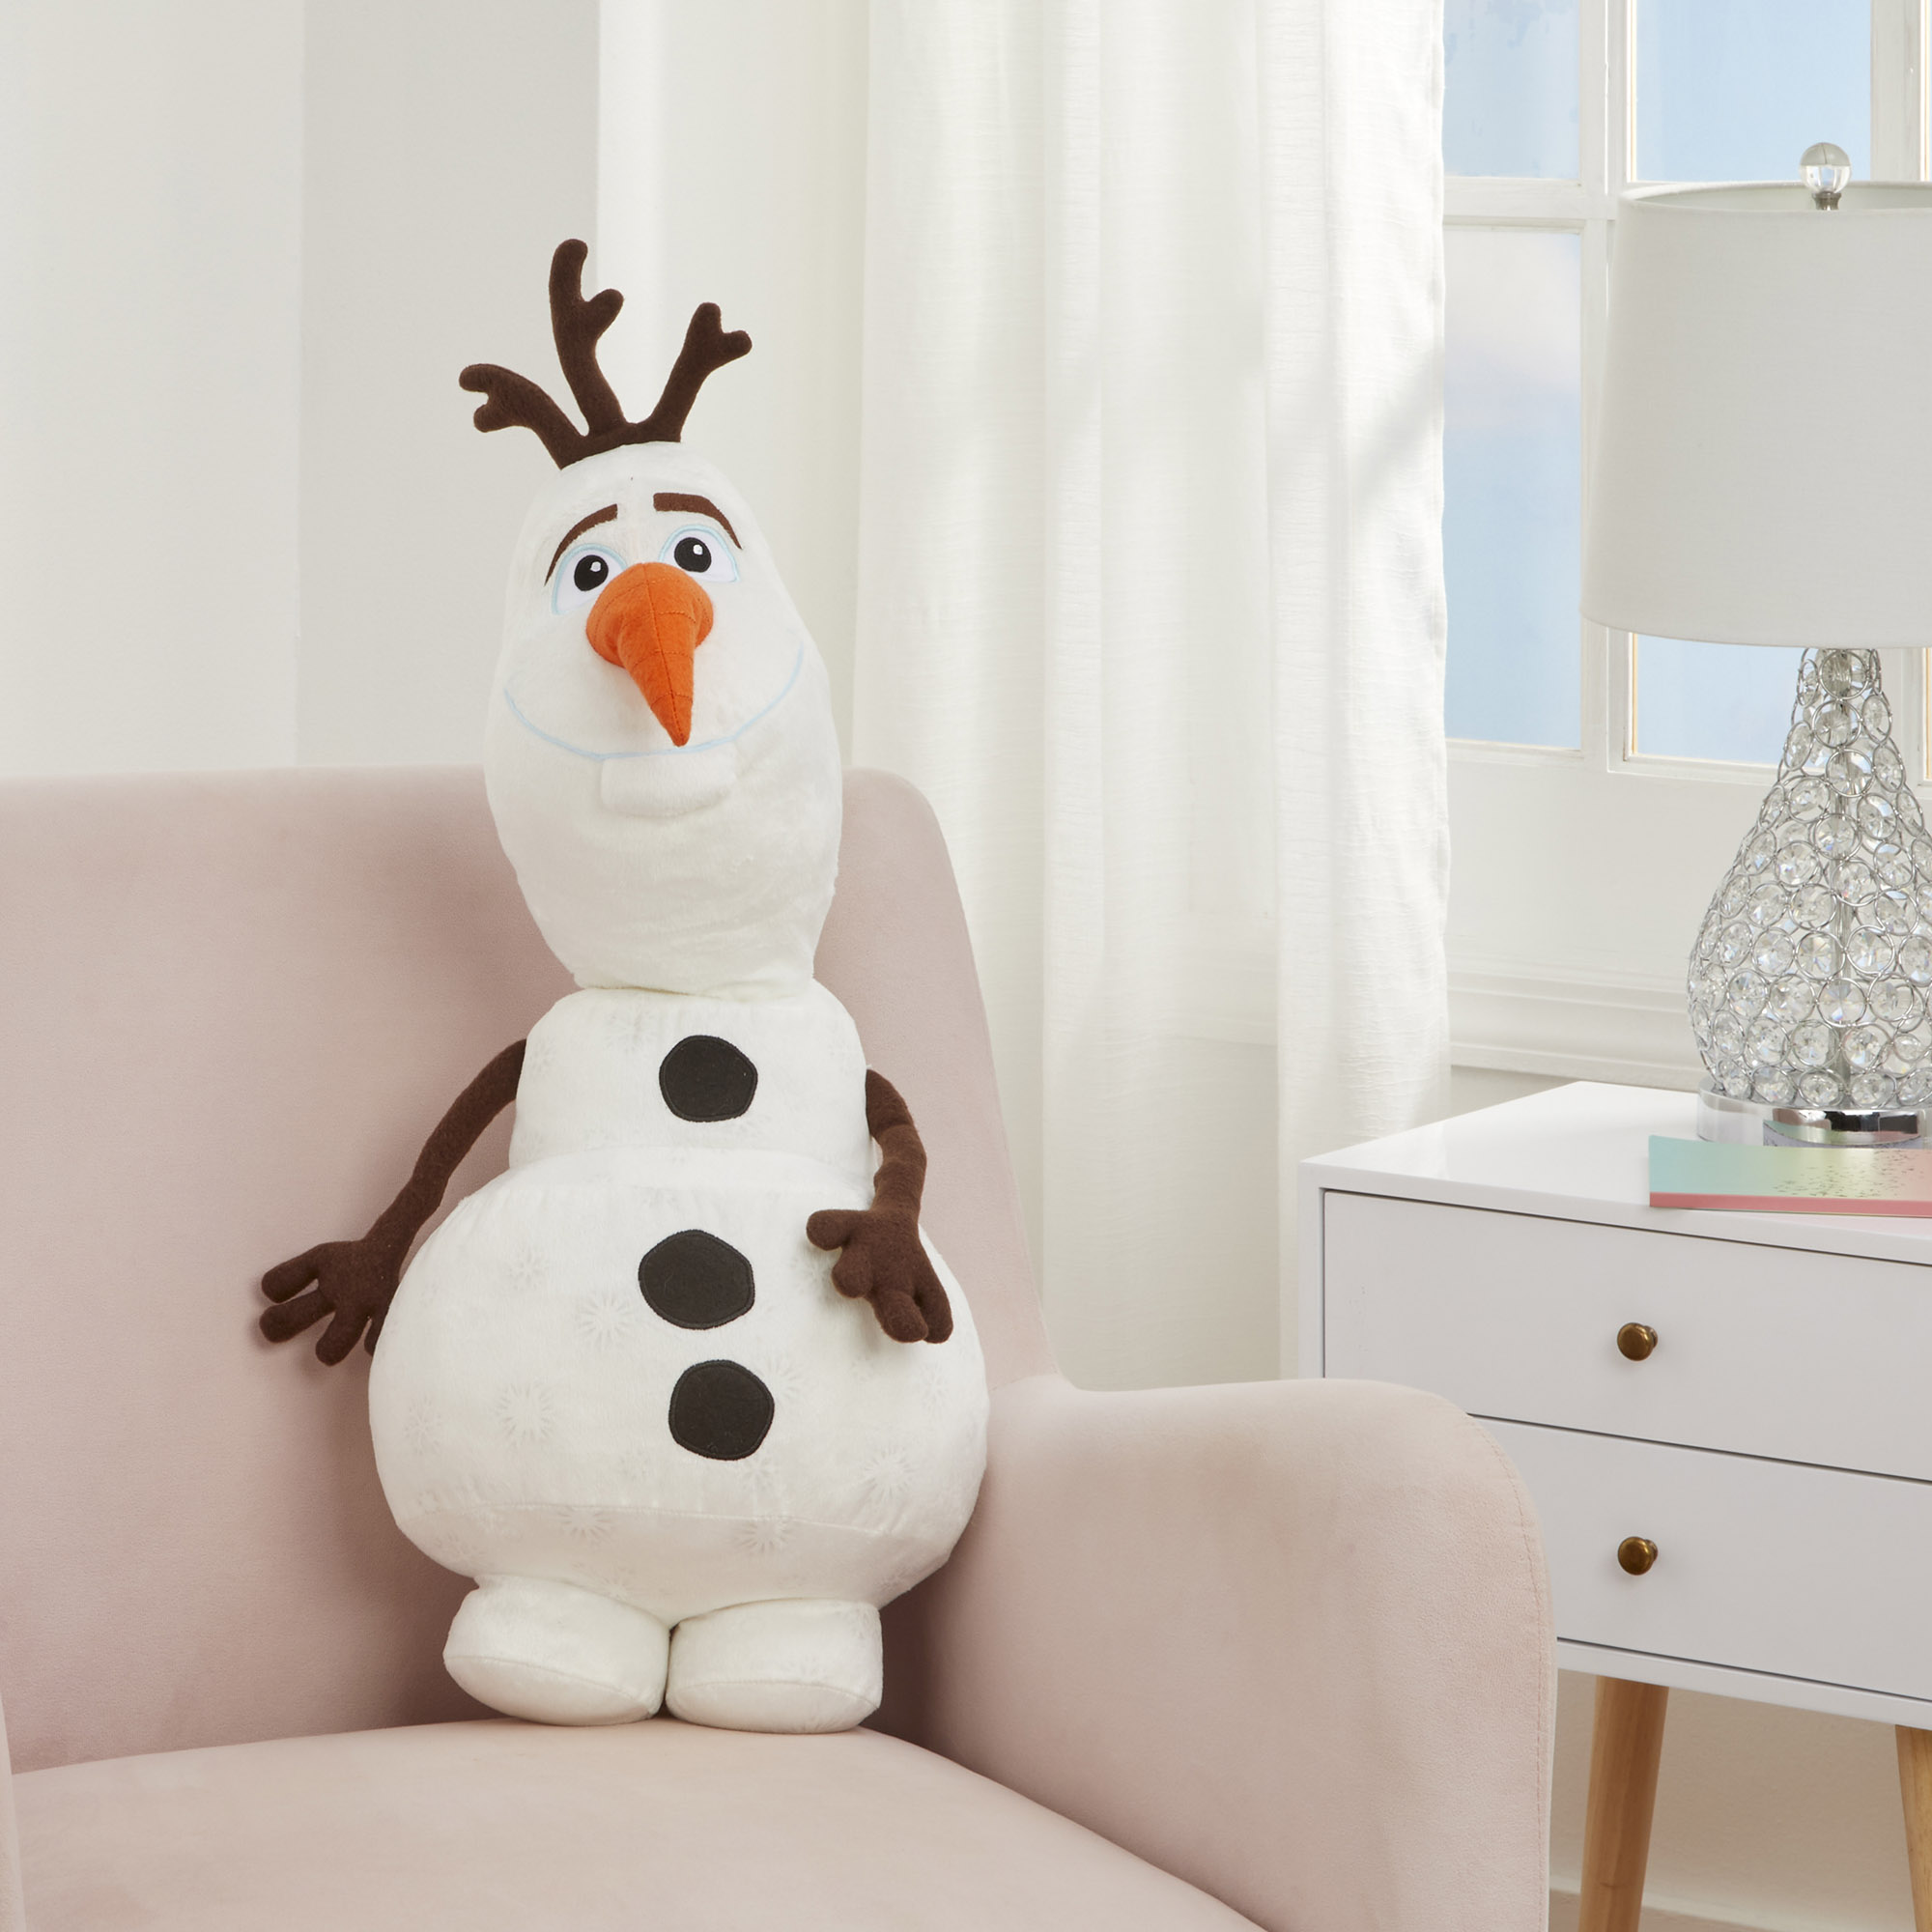 Disney Frozen Kids Olaf Bedding Plush Cuddle and Decorative Pillow Buddy, White - image 2 of 7